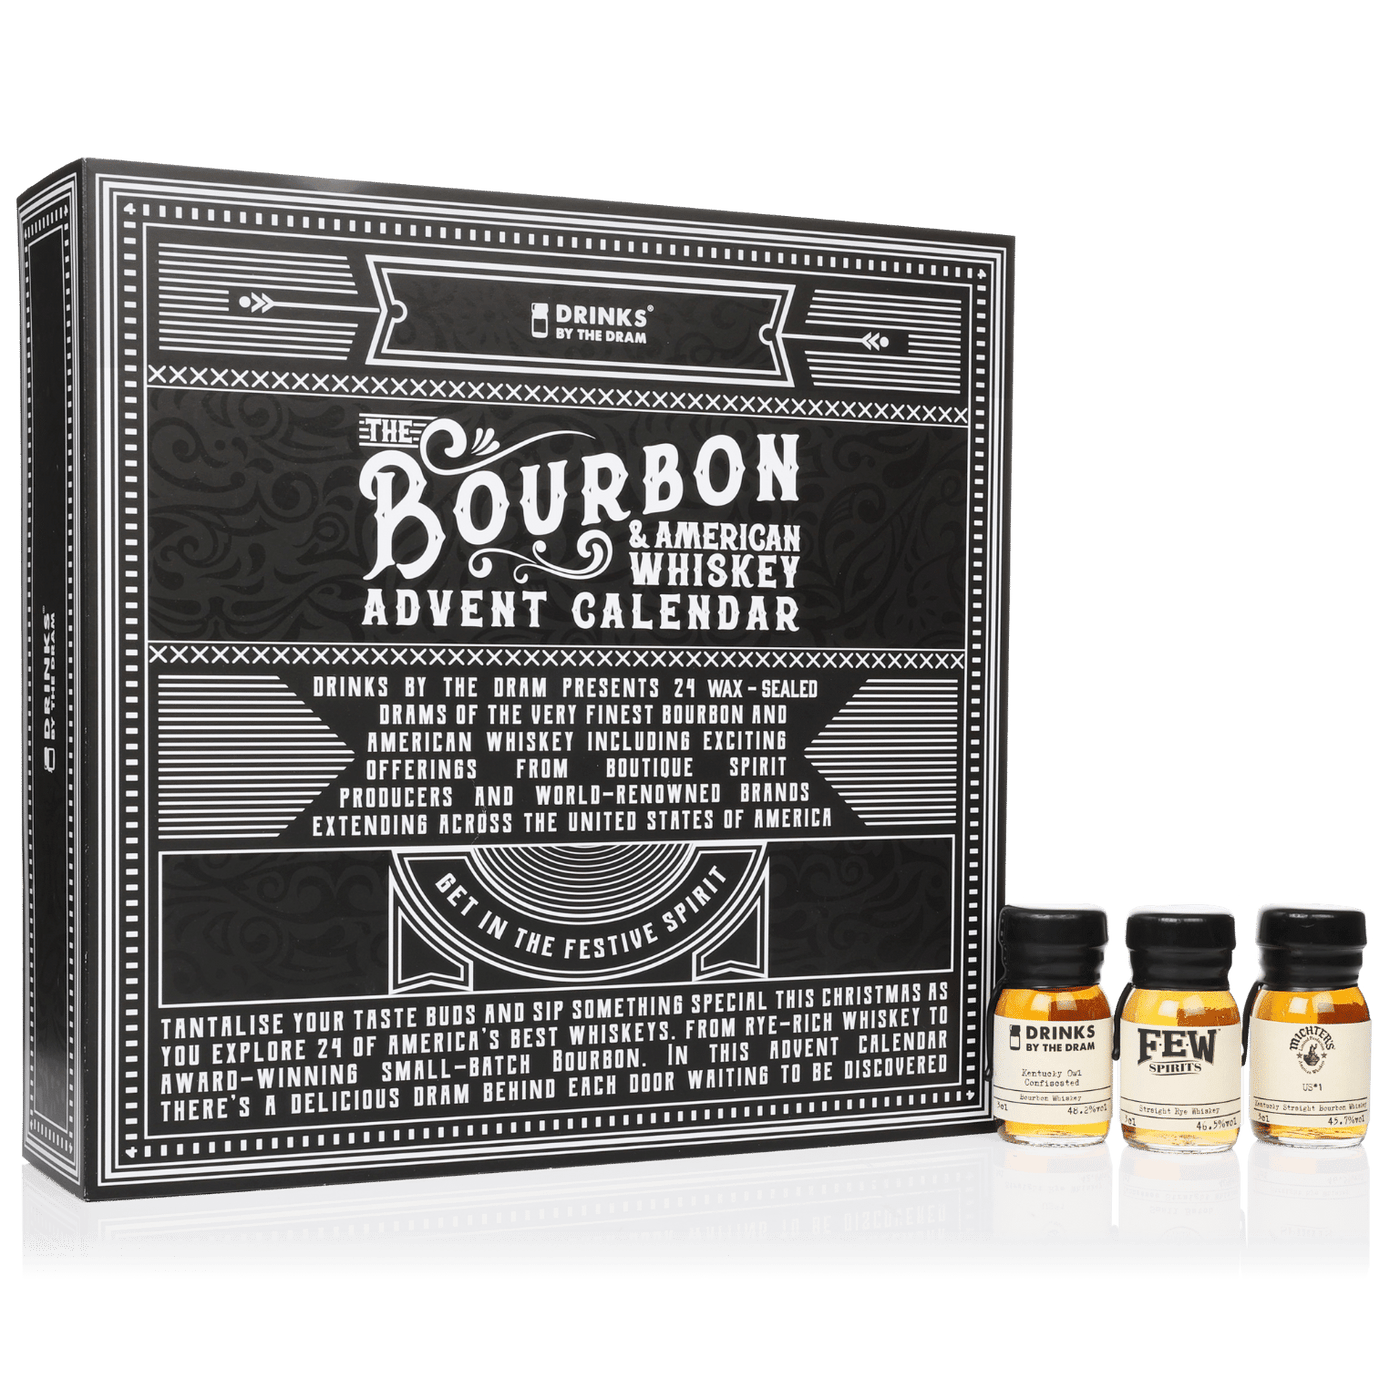 Buy the bourbon american whiskey minis holiday advent calendar drinks by the dram at